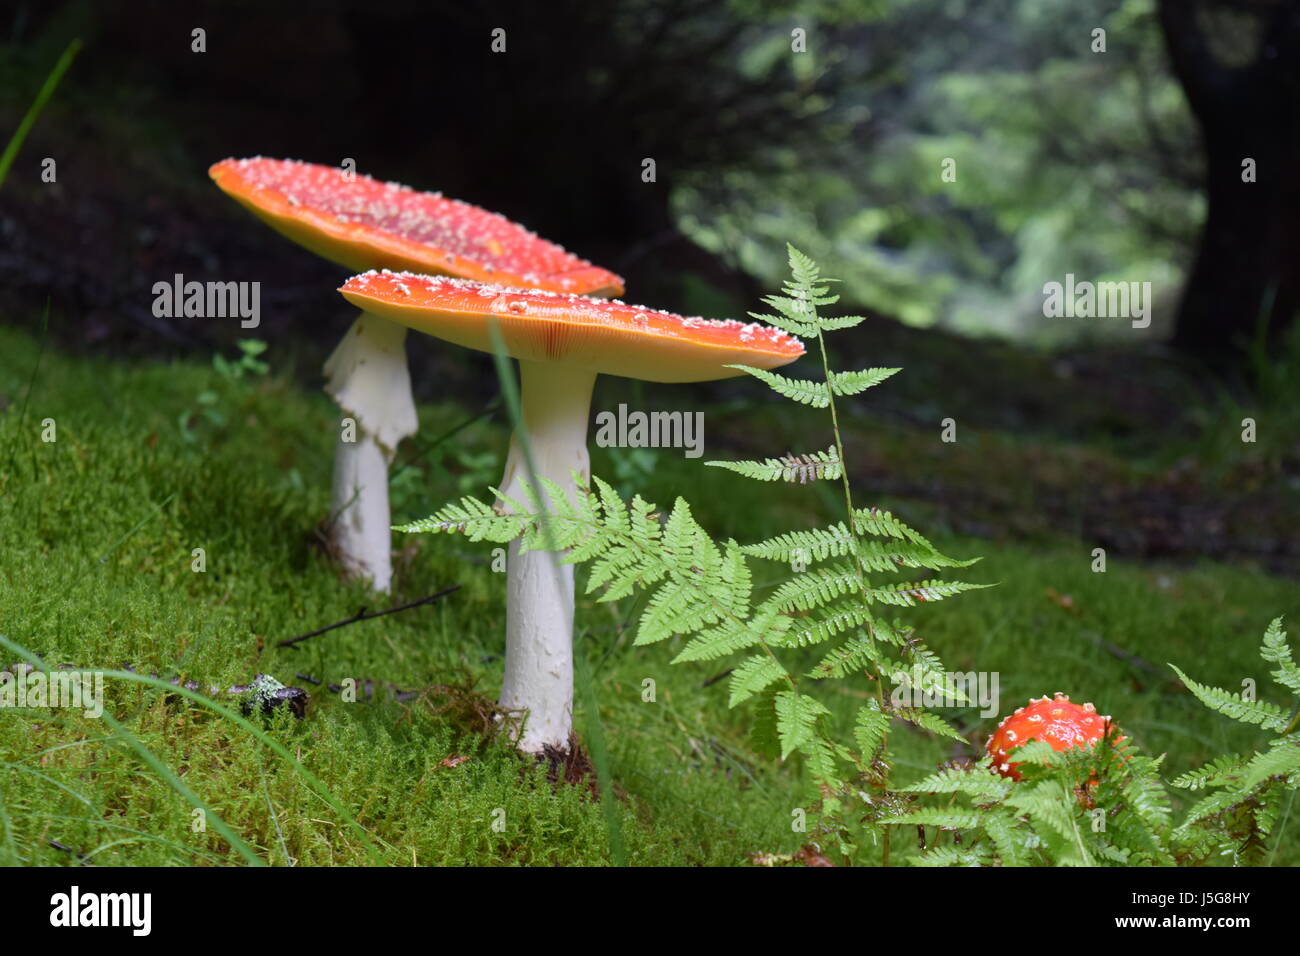 Fly agaric or fairy toadstool mushrooms in carpathian forrest, Romania. Stock Photo